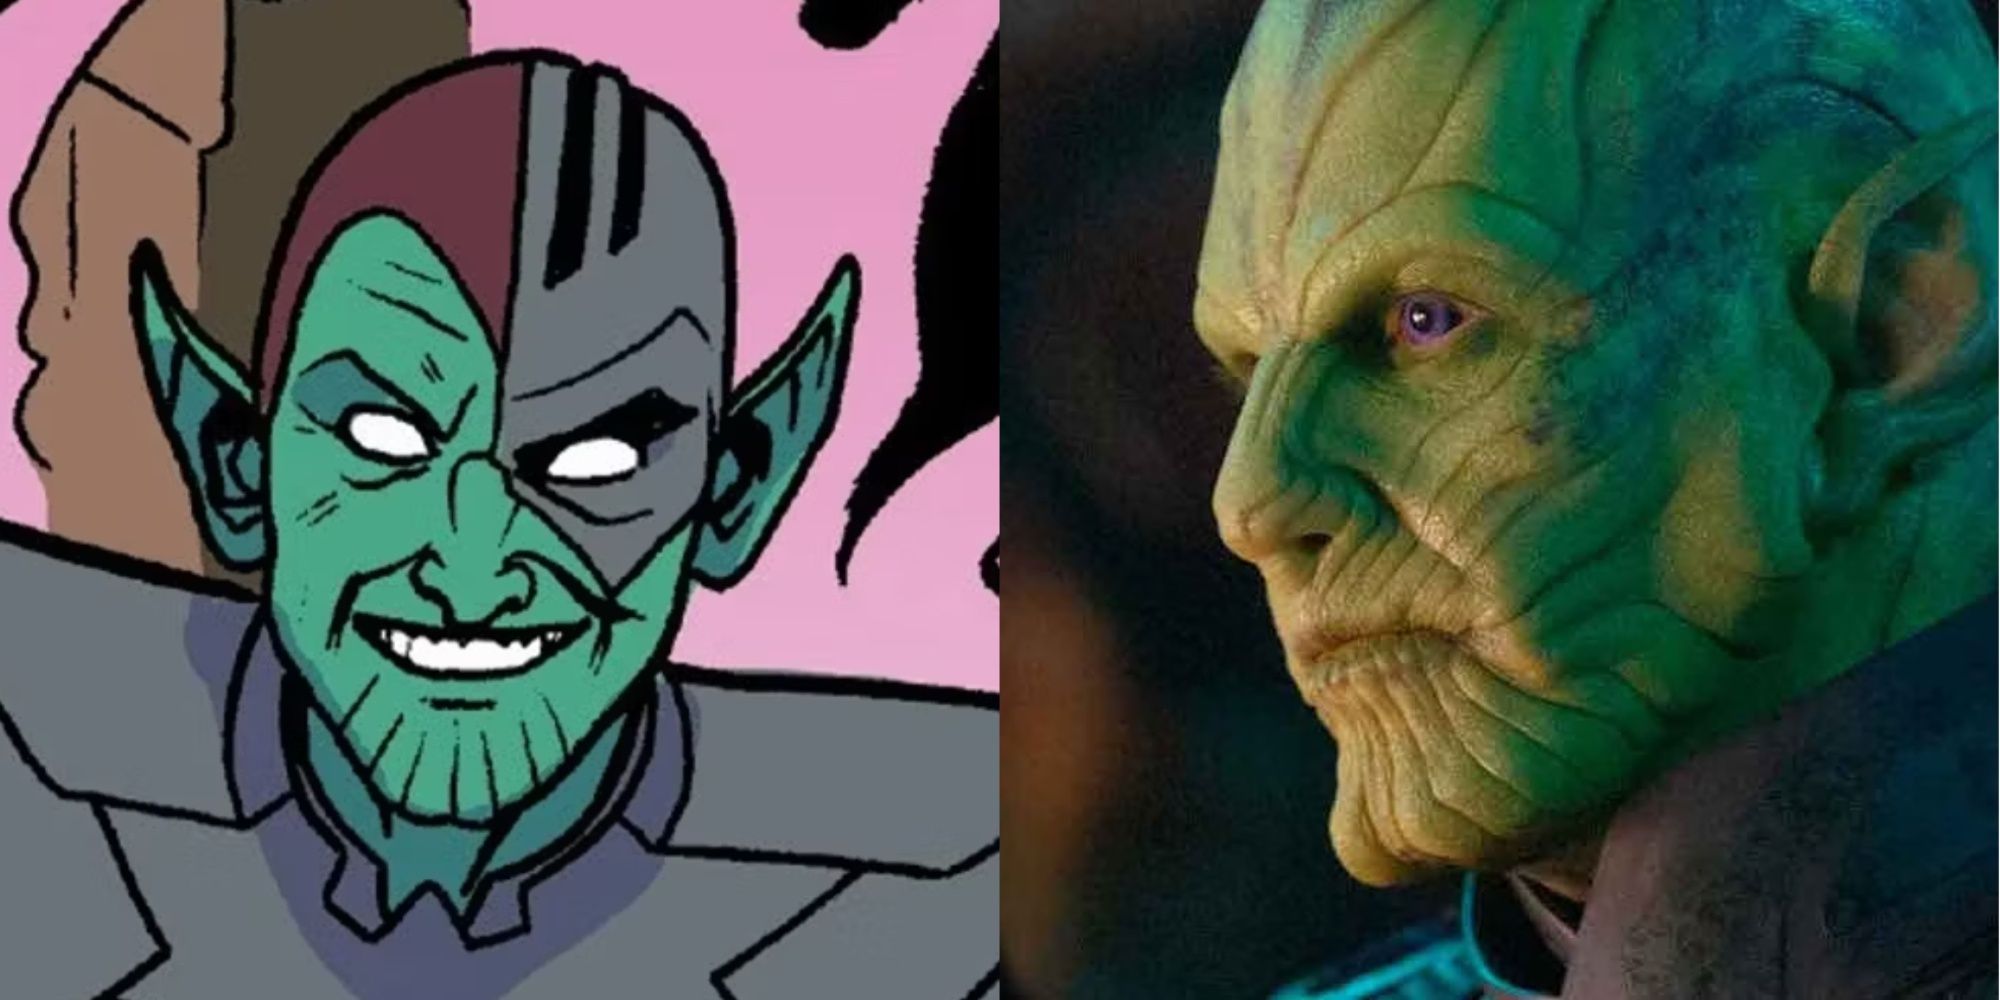 A split image of Talos the Skrull in Marvel Comics and the MCU